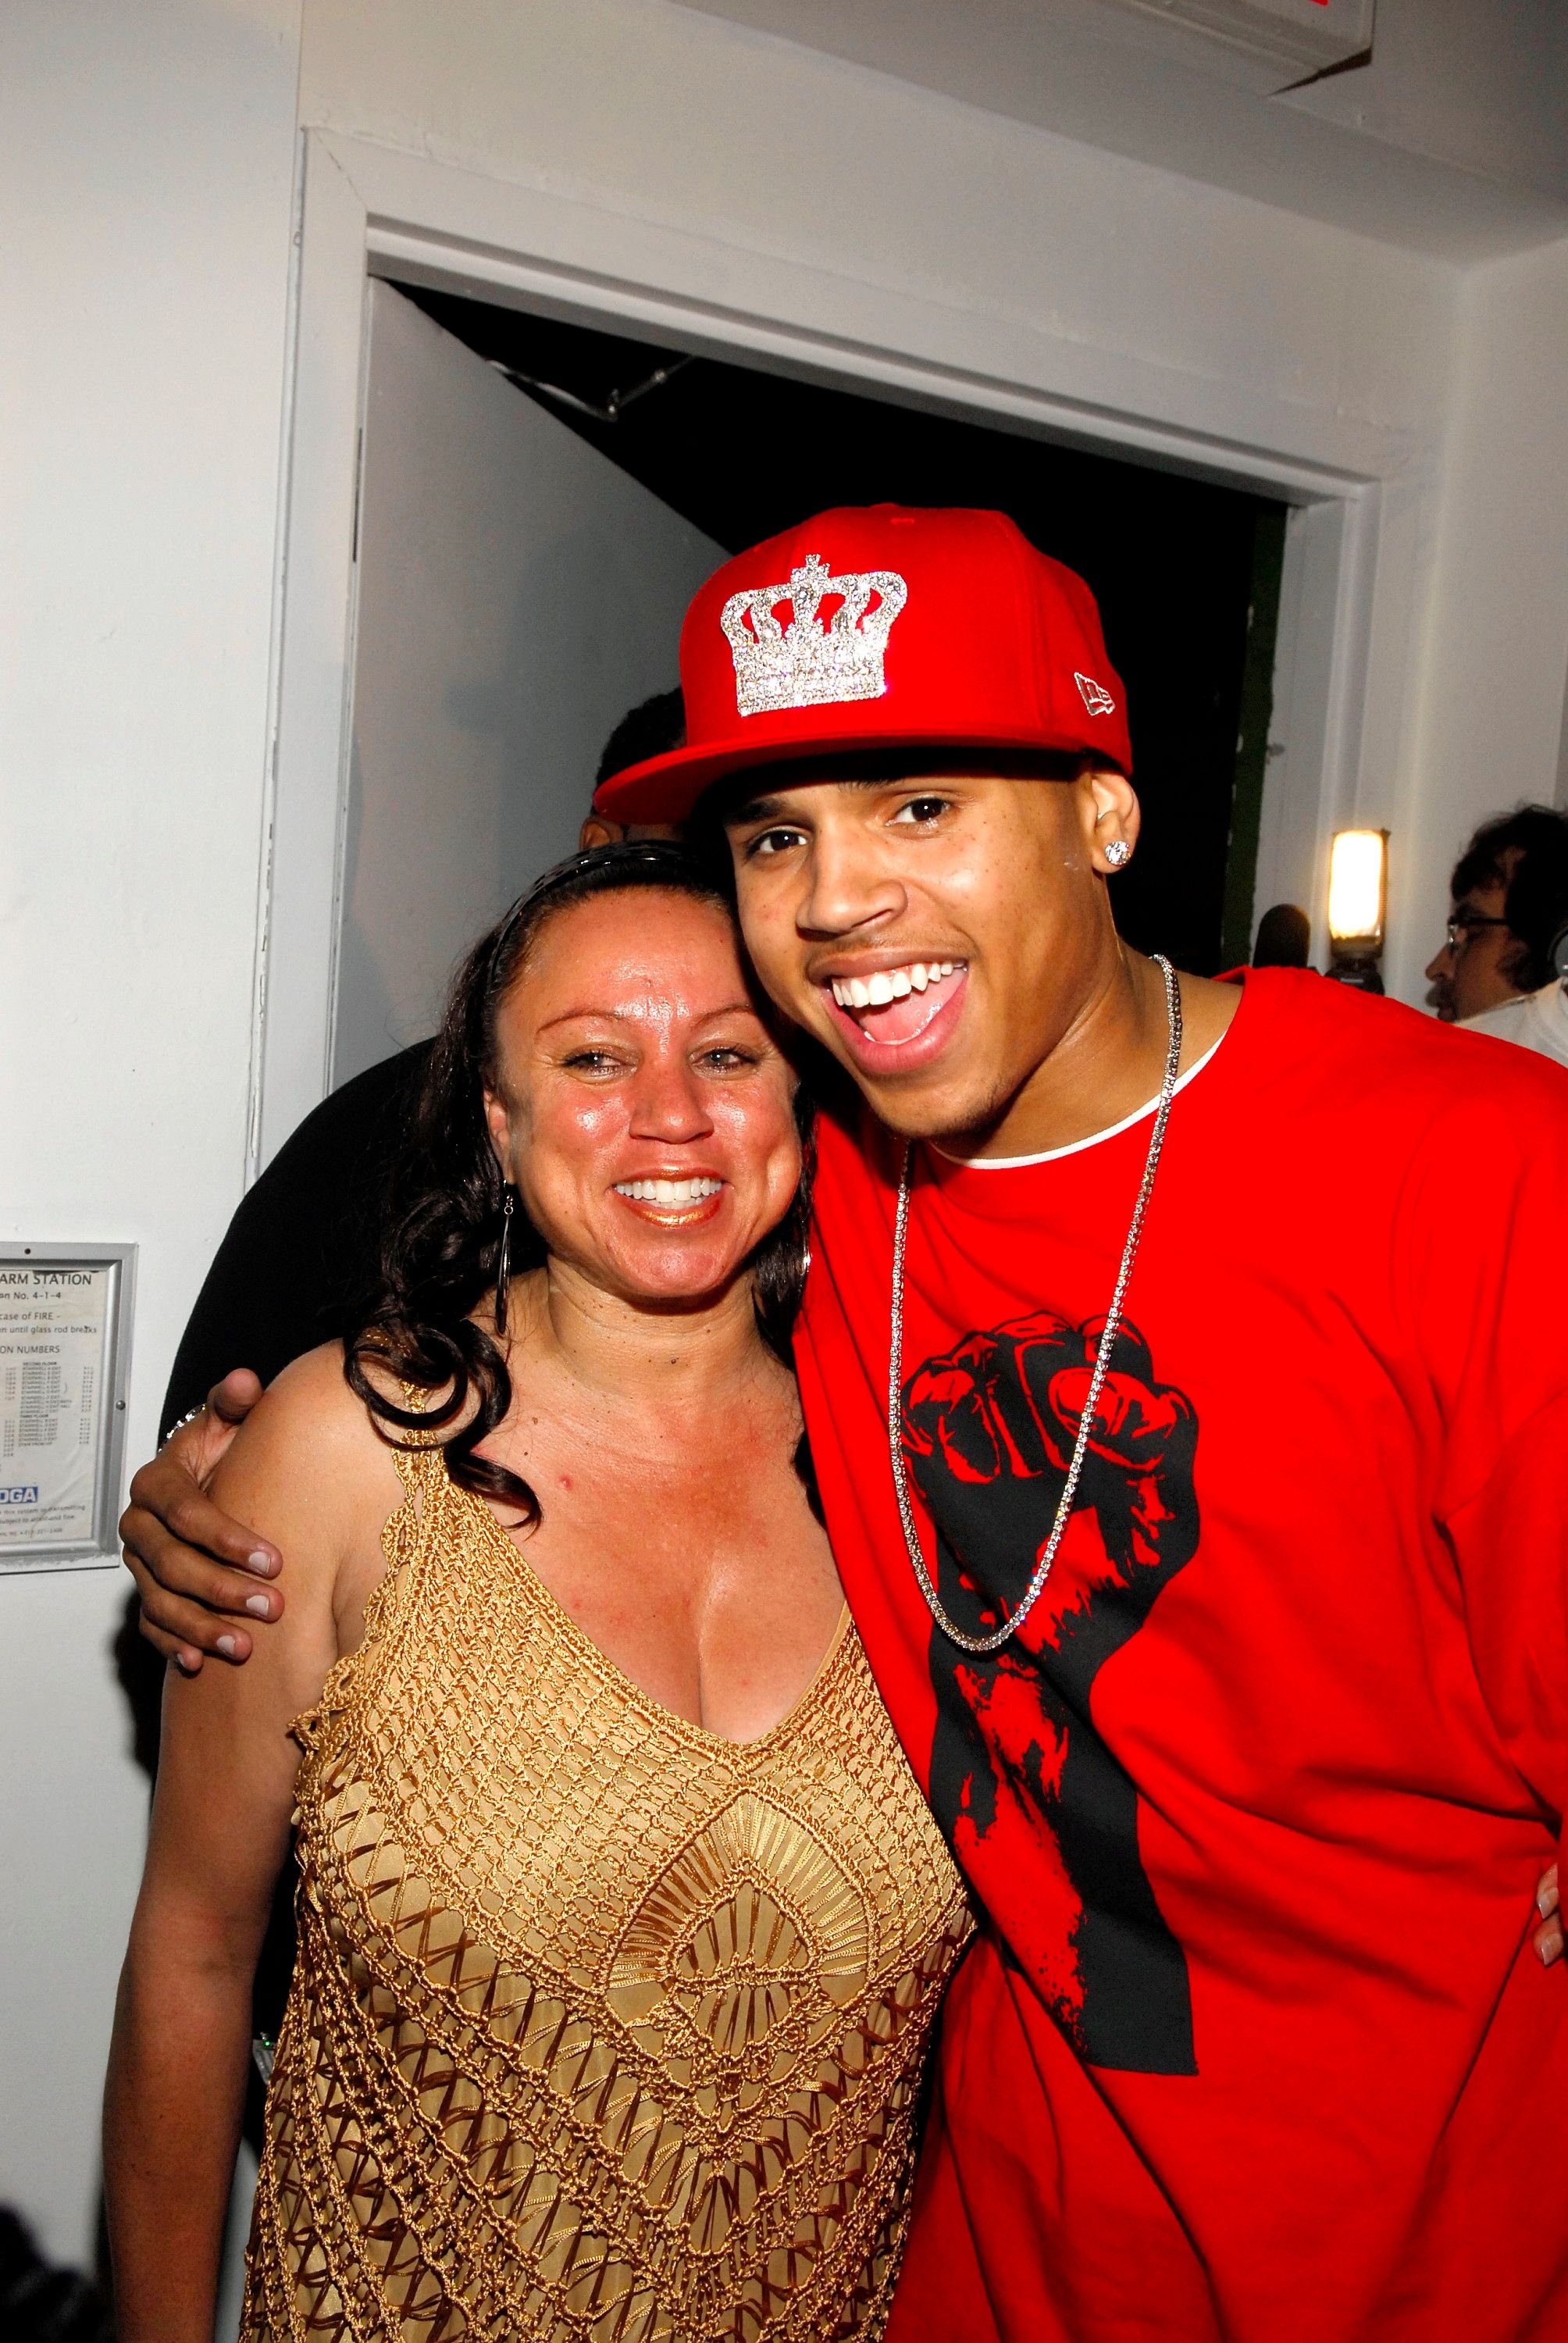 Joyce Hawkins and Chris Brown at his birthday bash at Avalon on May 06, 2007 in New York City | Photo: GettyImages